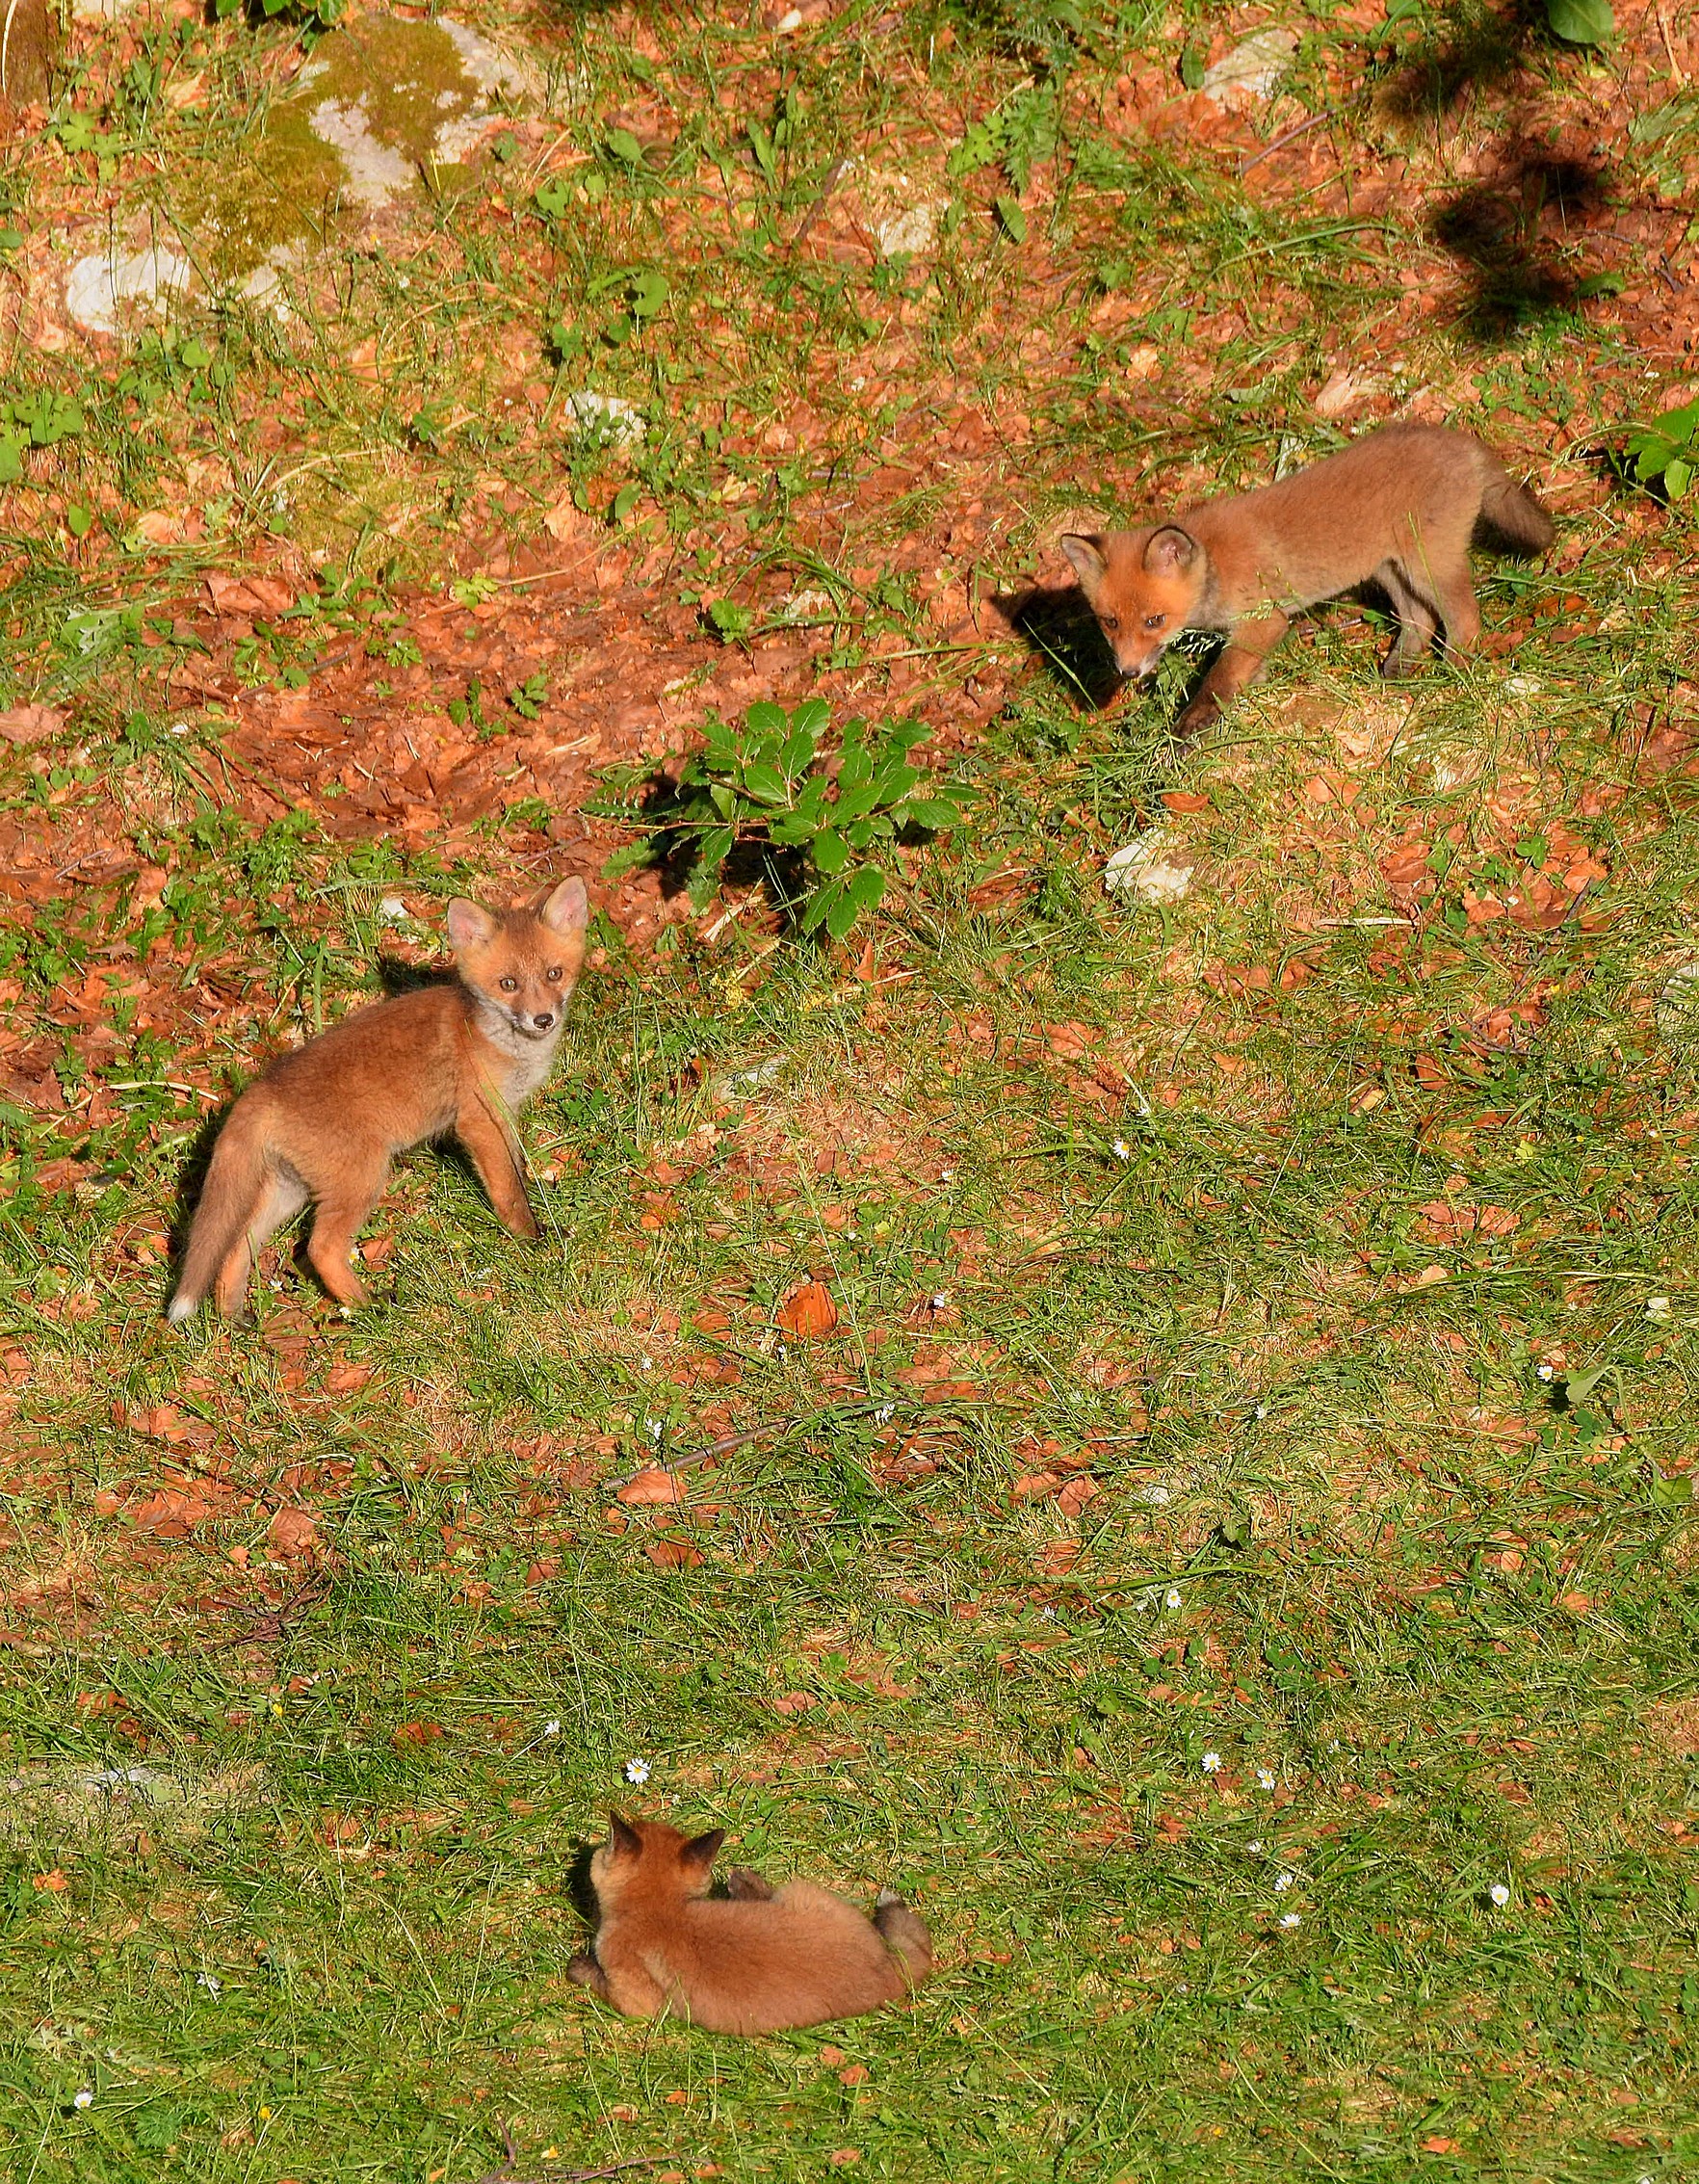 Discovering the world (Vulpes vulpes)...